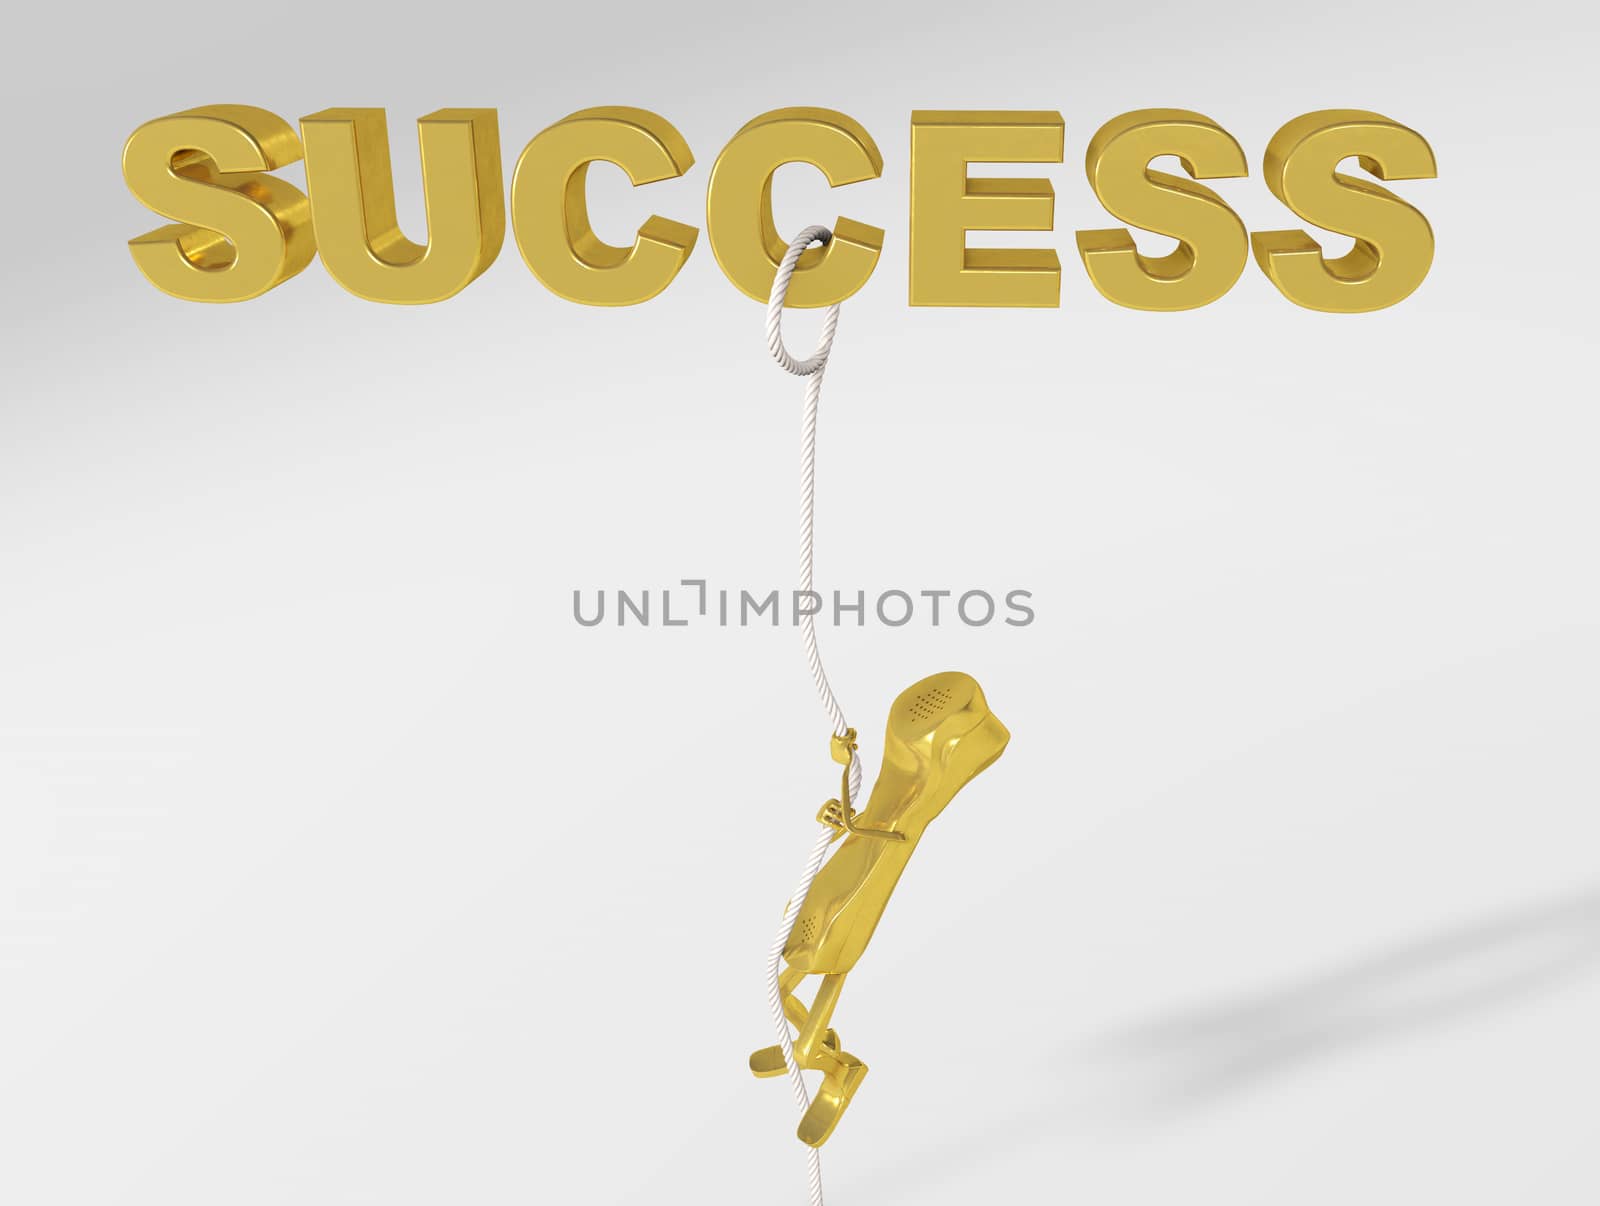 3d rendering of a telephone character climbing to success by F1b0nacci